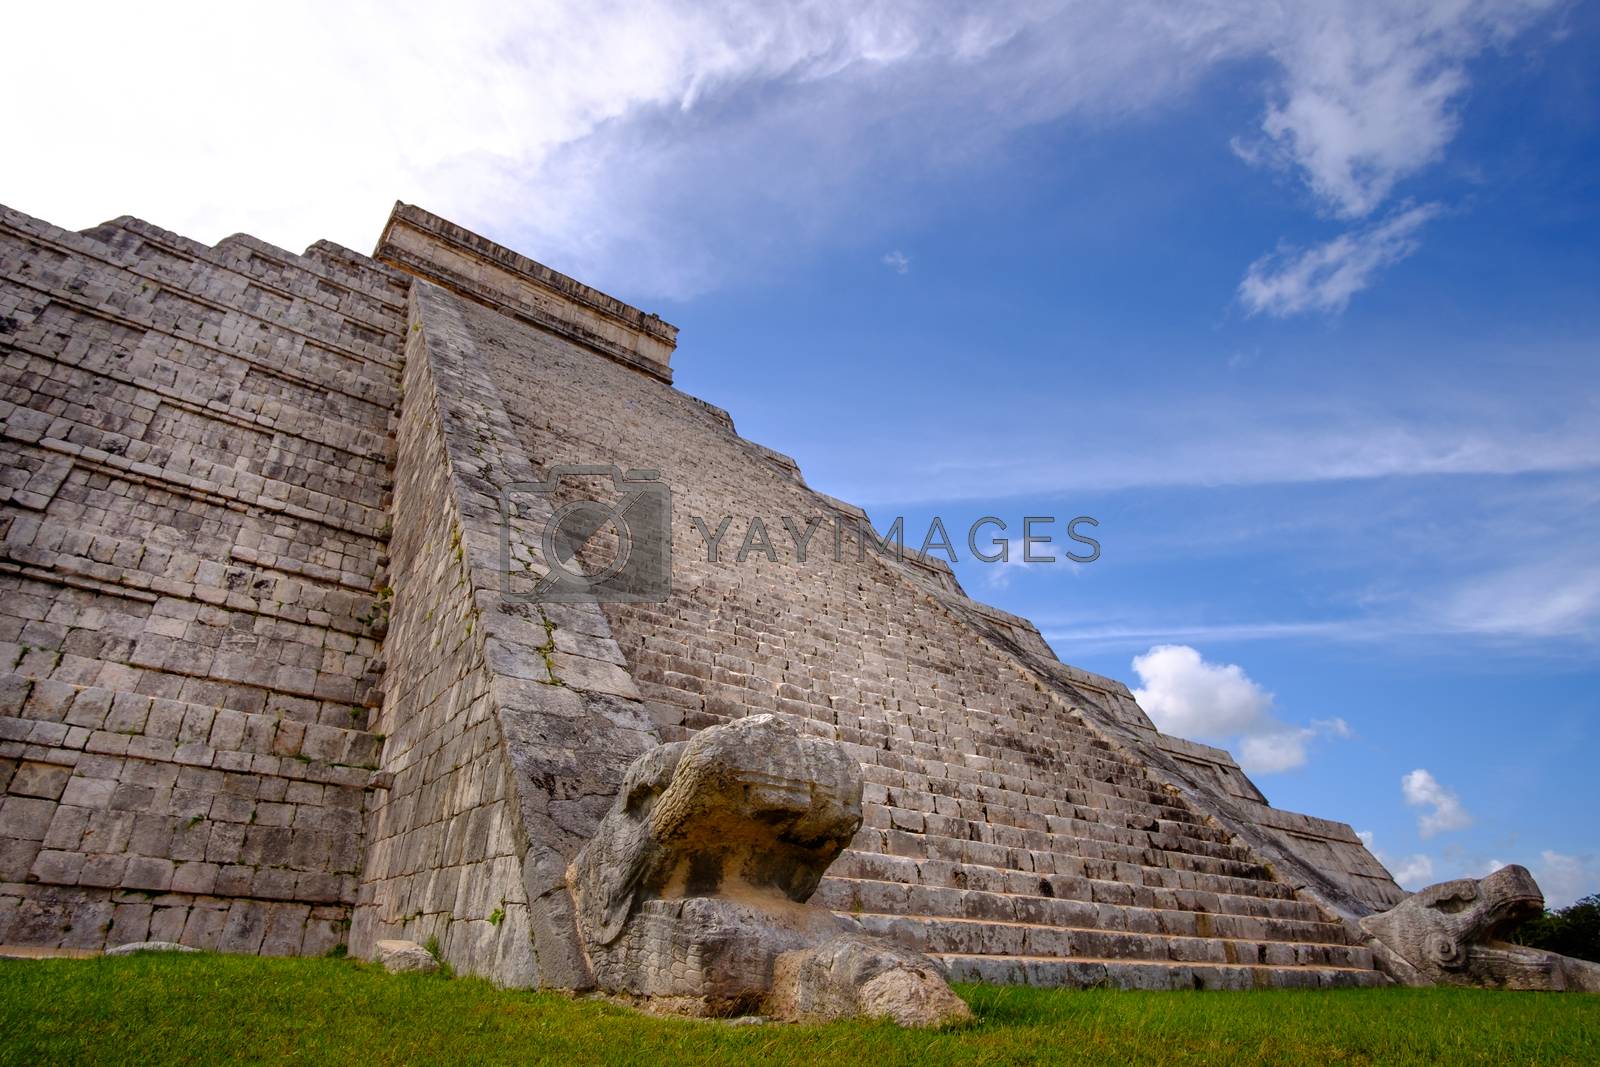 Royalty free image of Famous Mayan pyramid in Chichen Itza with stone stairs by martinm303